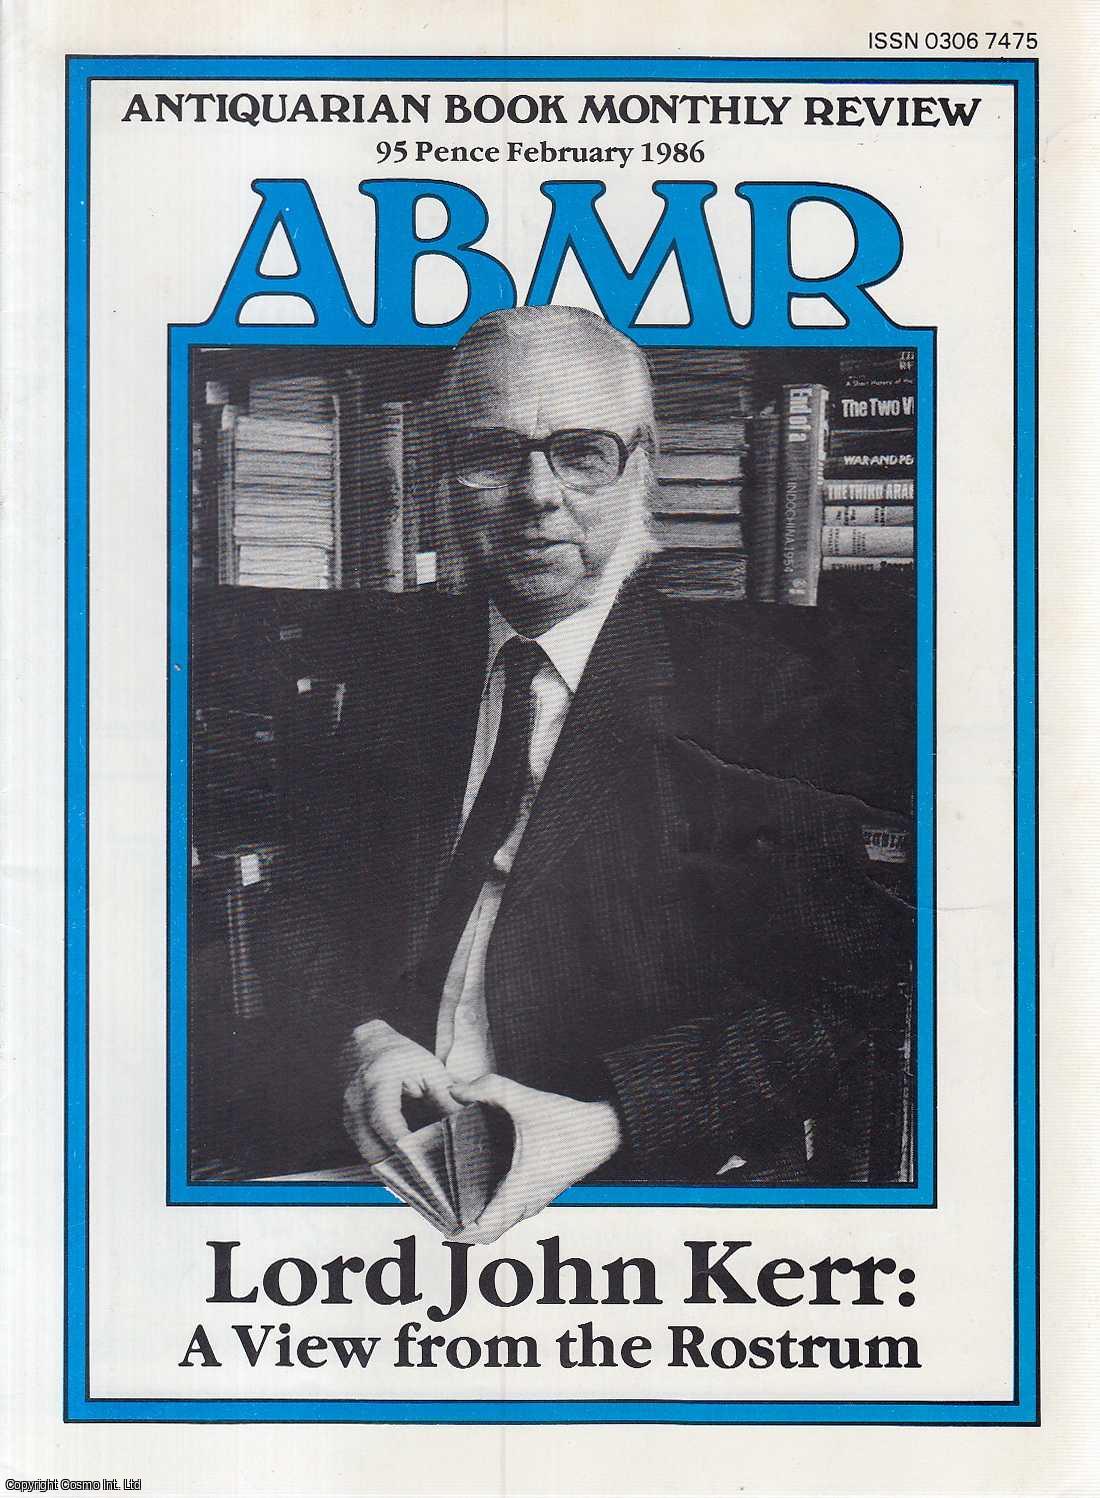 John R. Gretton - Harold Acton : An Aesthete and his Books. An original article contained in a complete monthly issue of the Antiquarian Book Monthly Review, 1986.